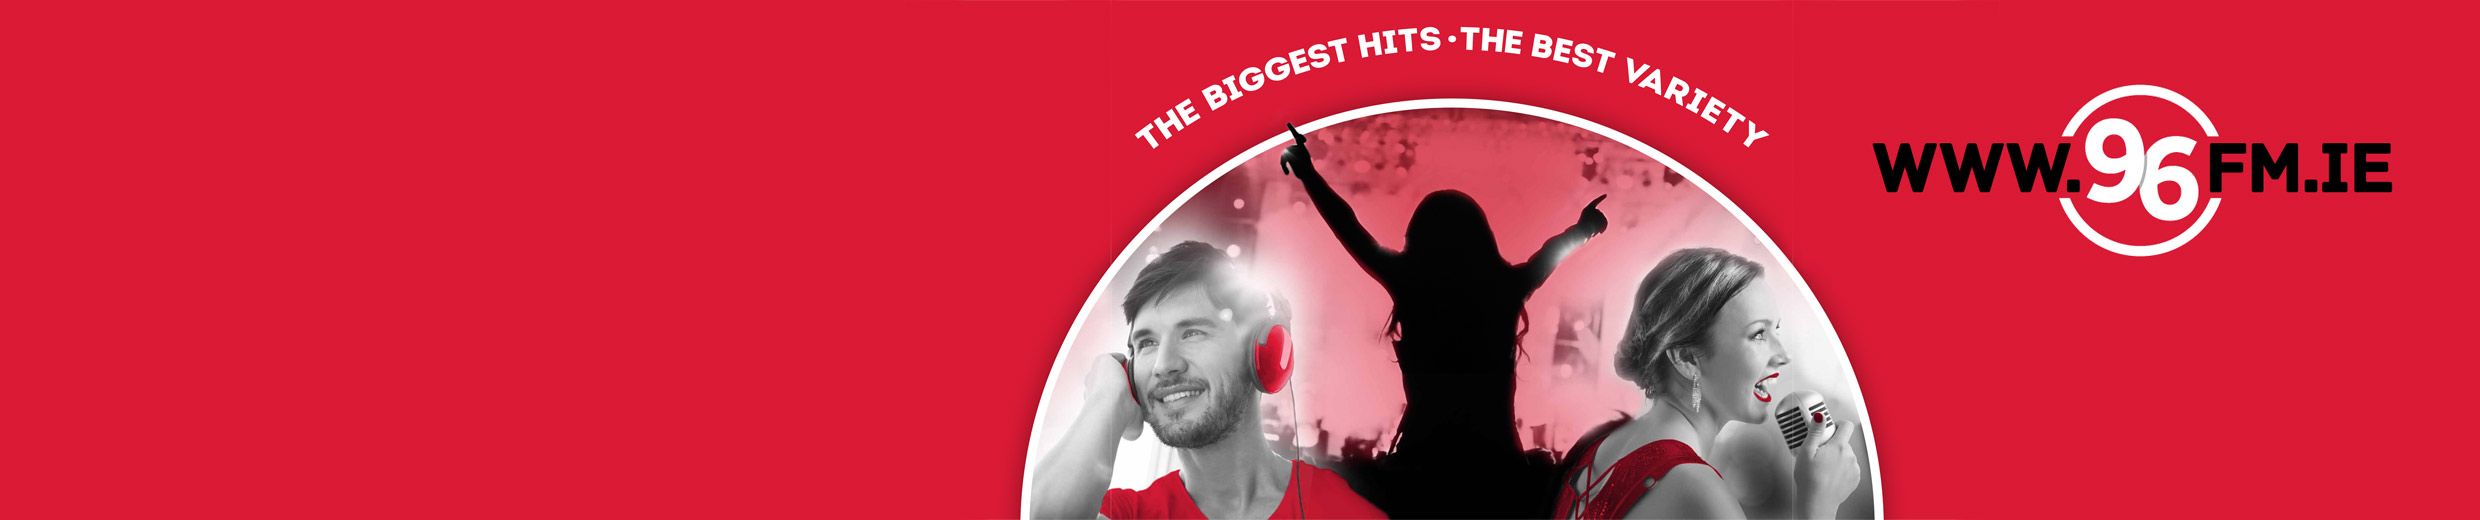 Stream Corks 96FM | Listen to podcast episodes online for free on SoundCloud